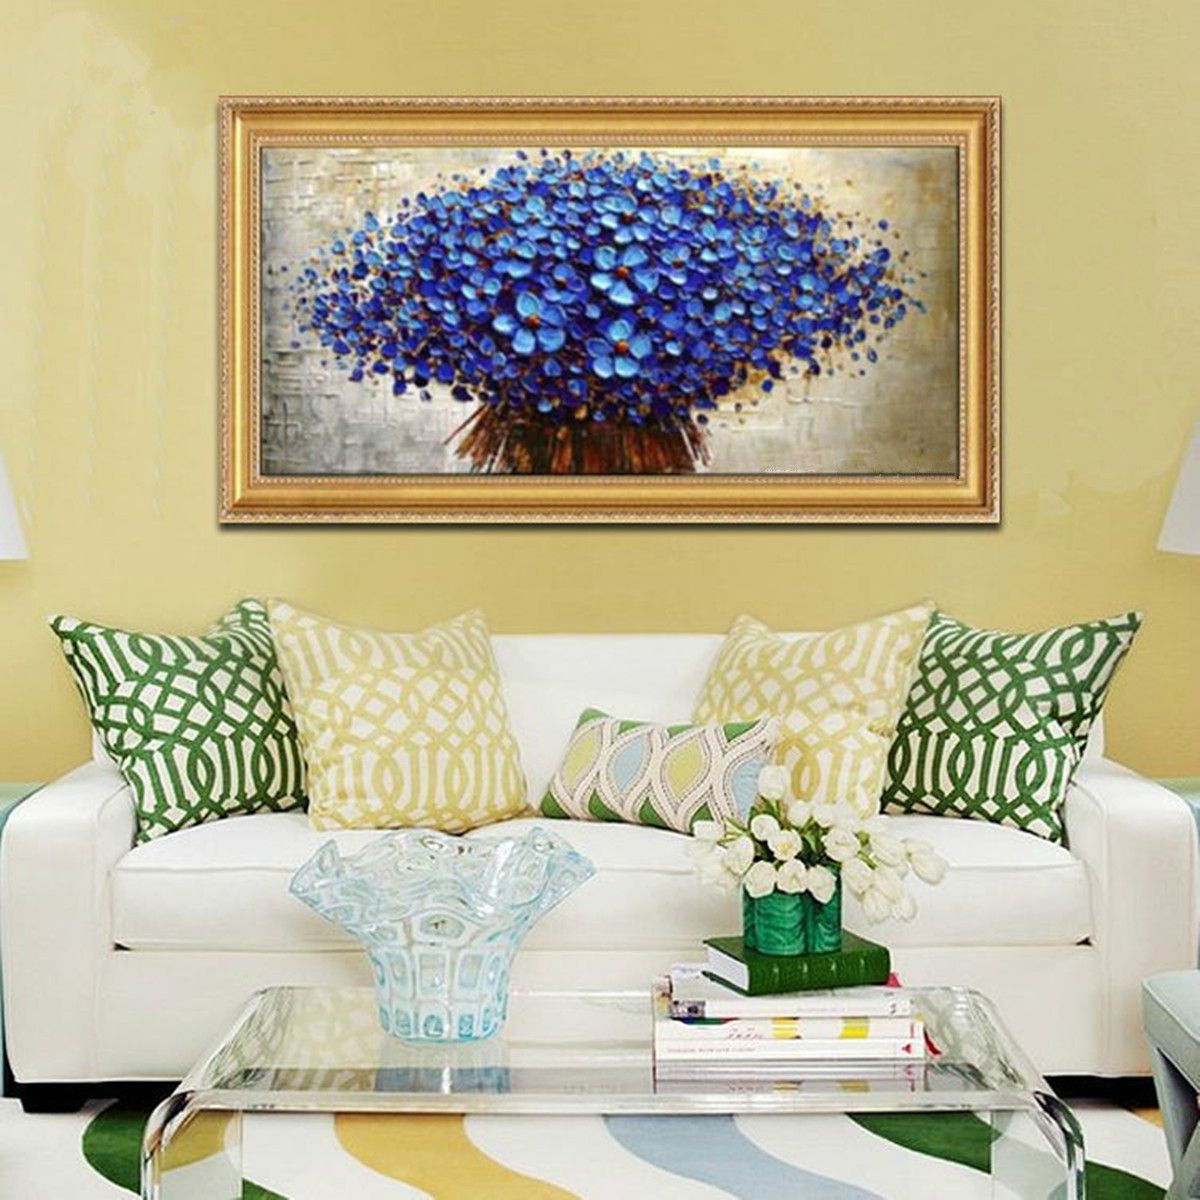 Blue-Unframed-Tree-Canvas-Art-Oil-Paintings-Modern-Abstract-Wall-Home-Decor-1142508